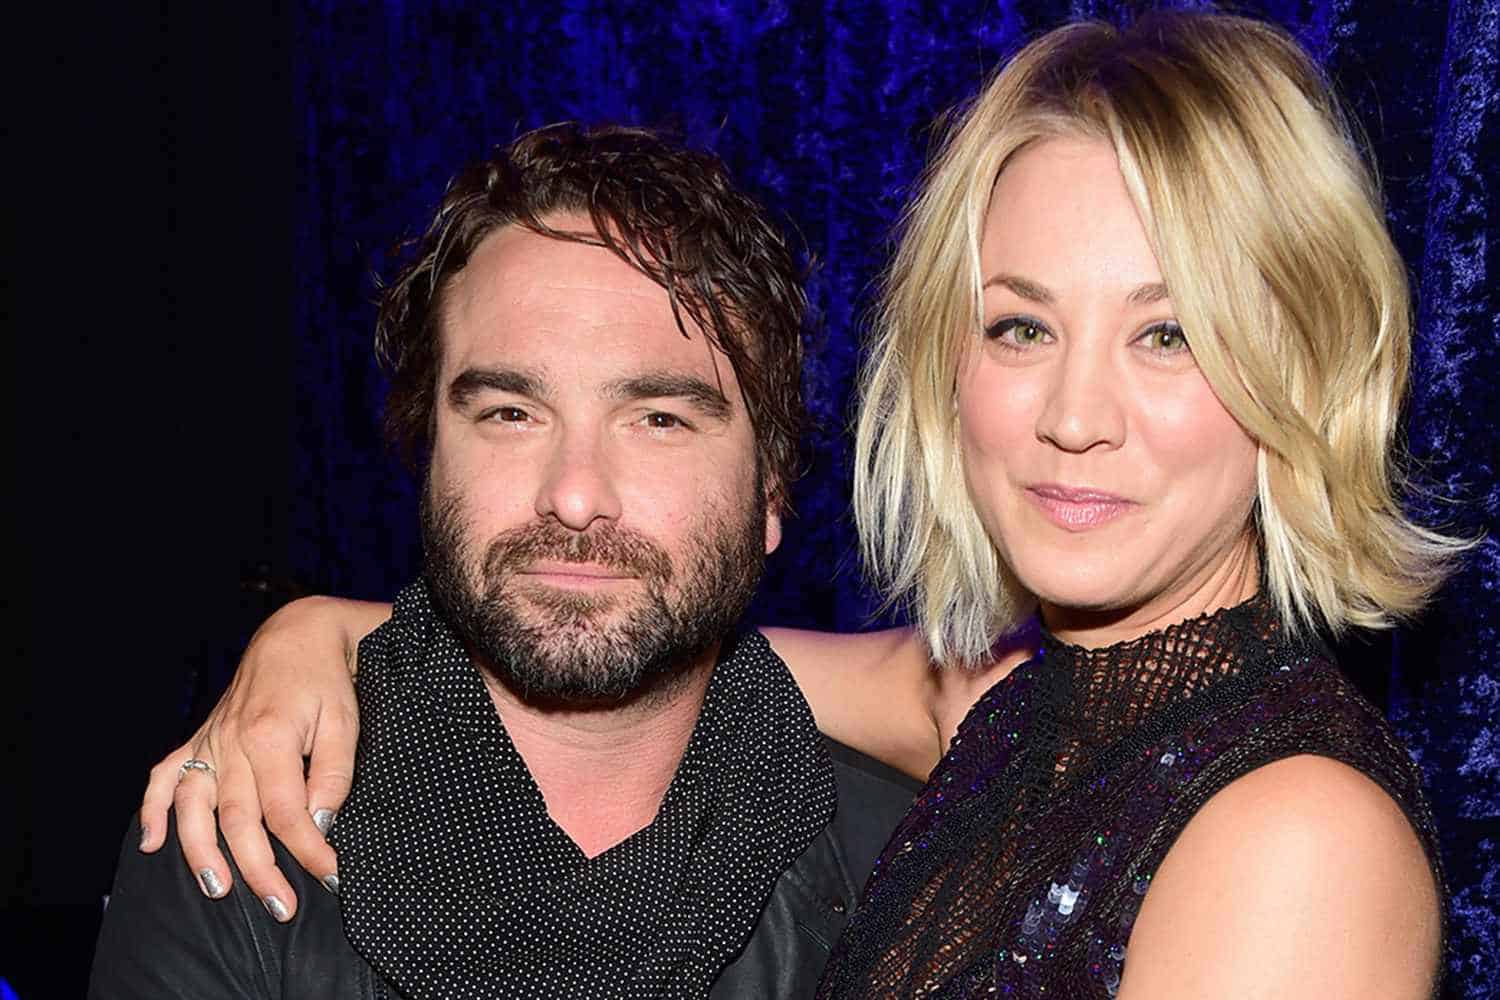 Kaley Cuoco with ex and "The Big Bang Theory" co-star, Johnny Galecki.